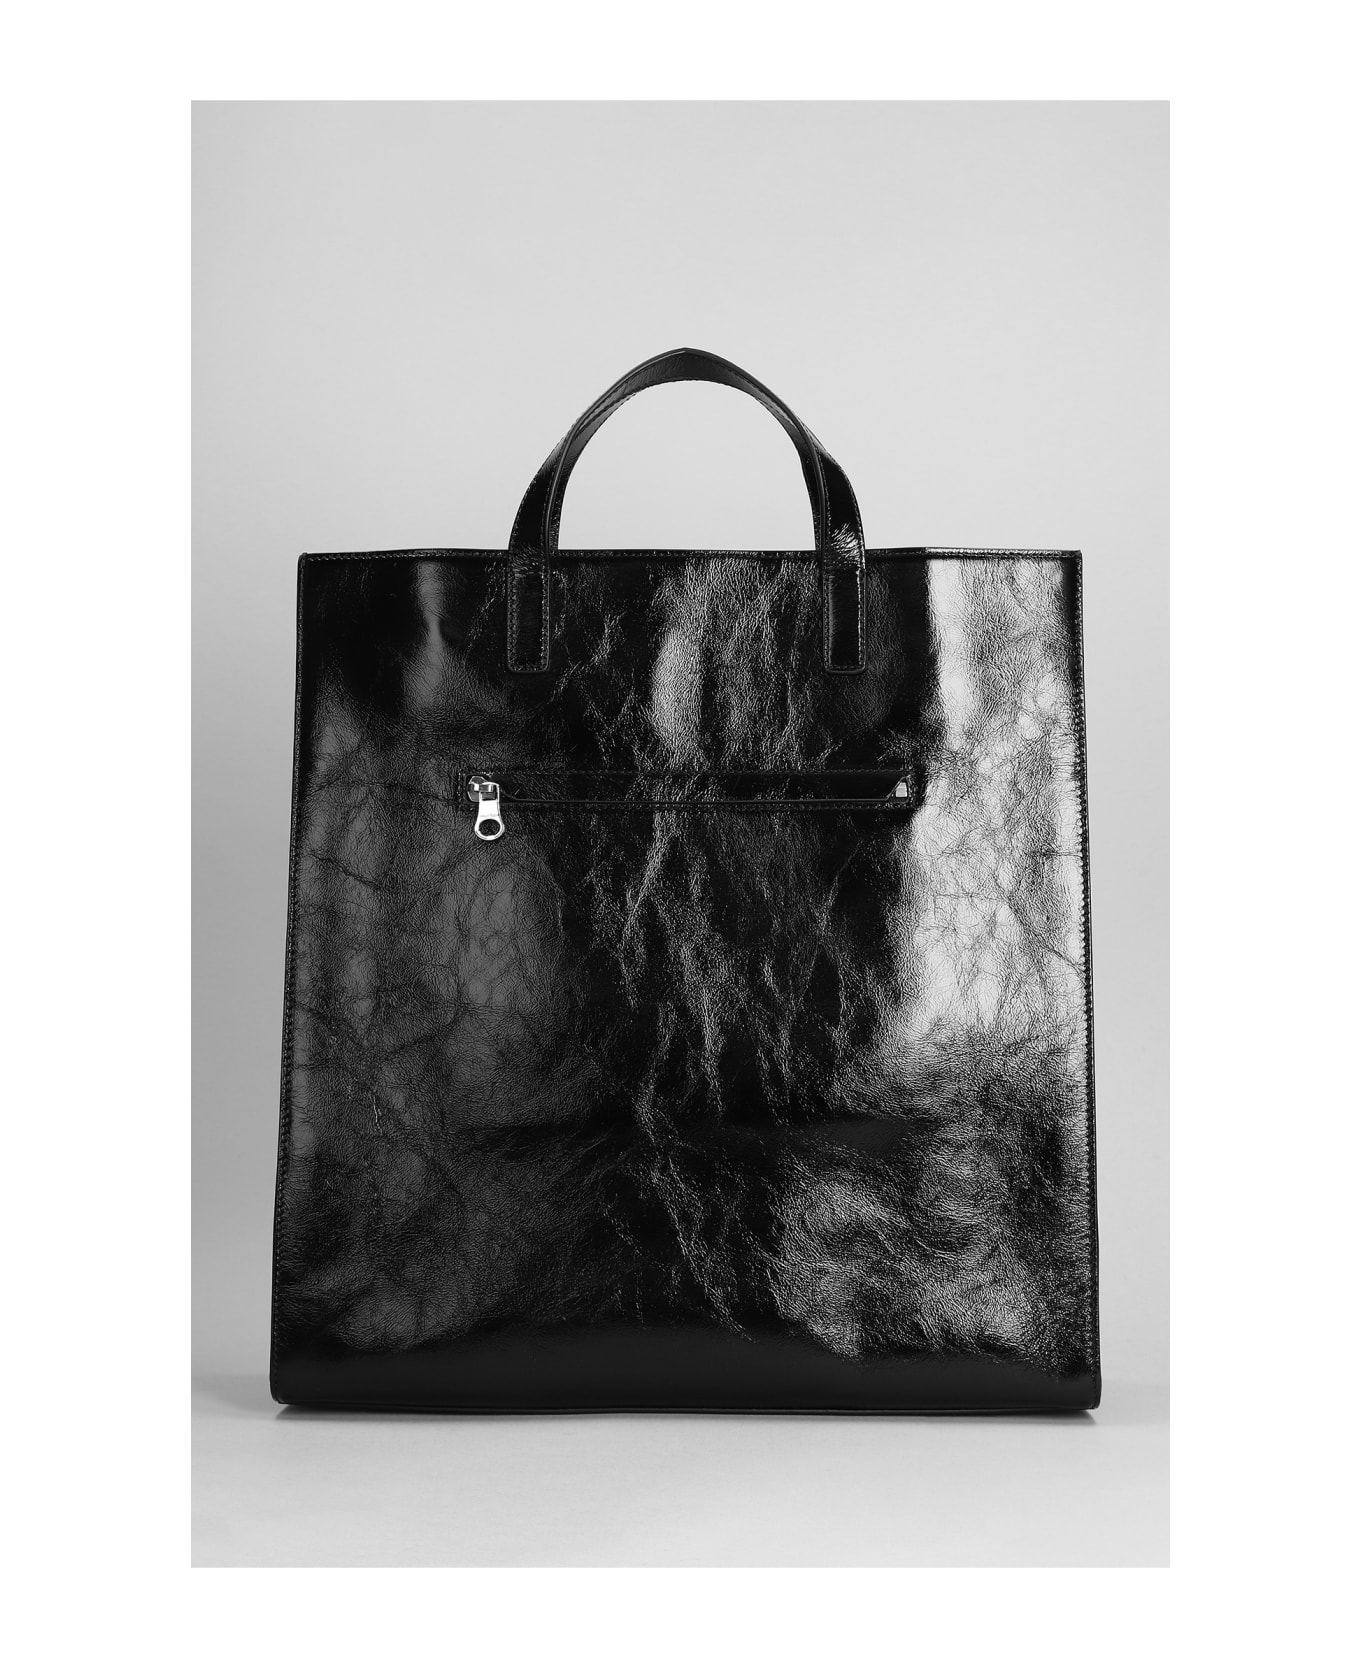 Courrèges Tote In Black Patent Leather - black